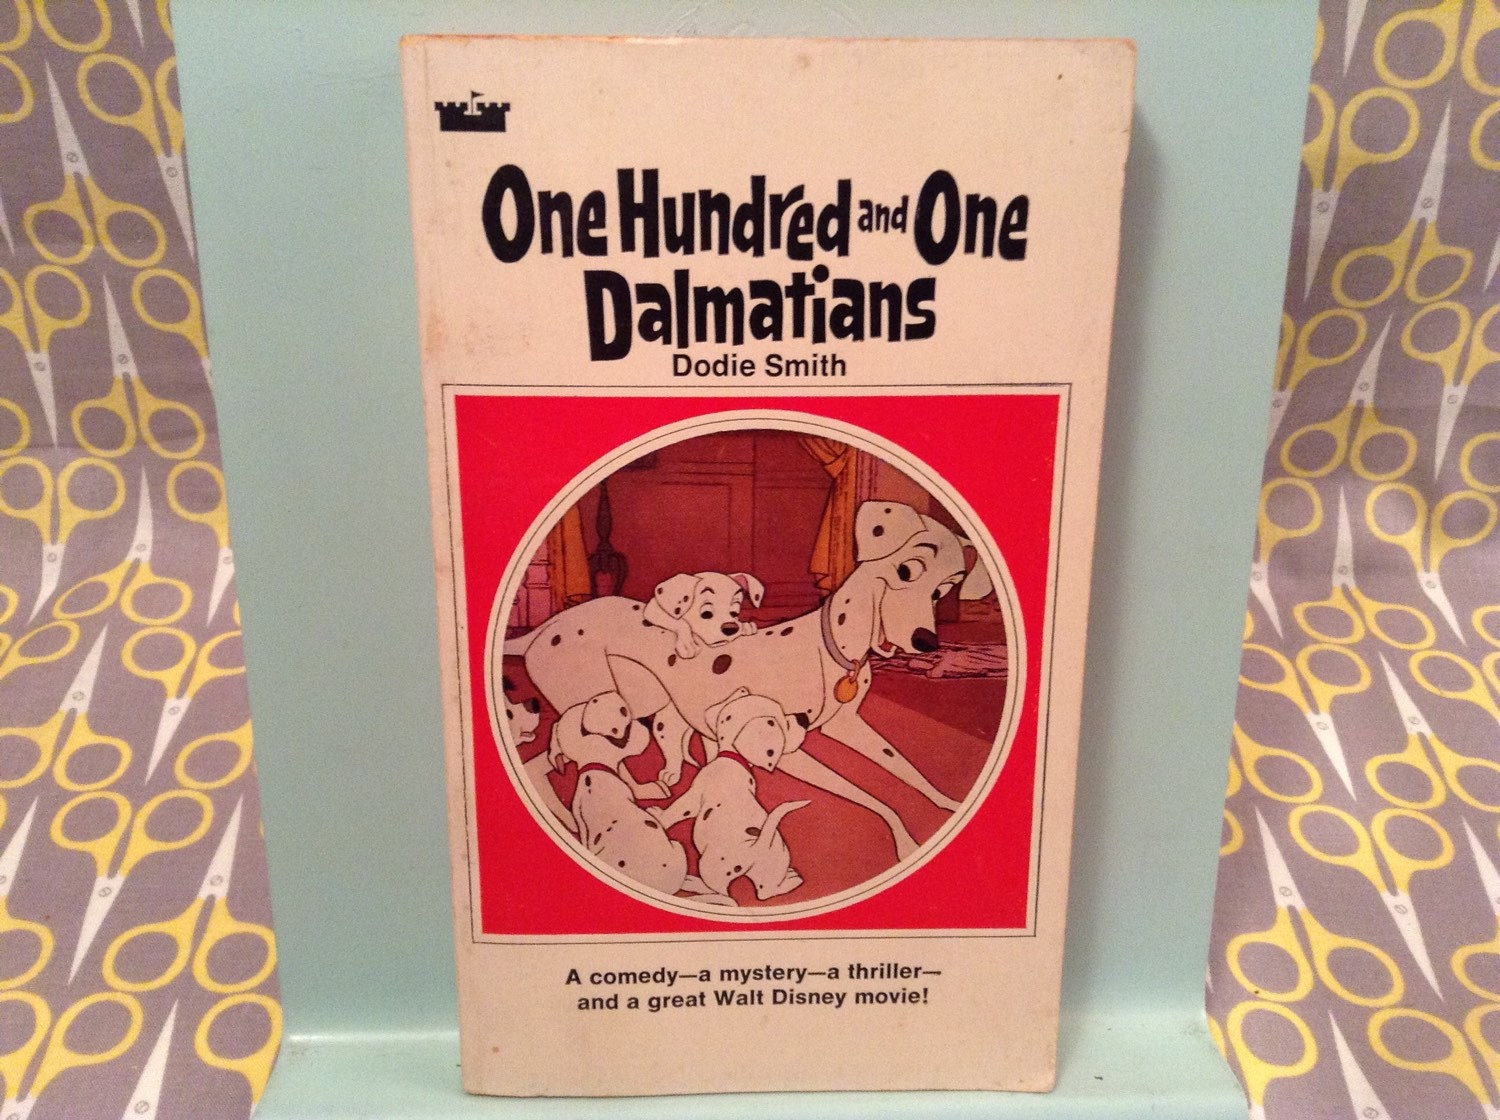 the one hundred and one dalmatians book